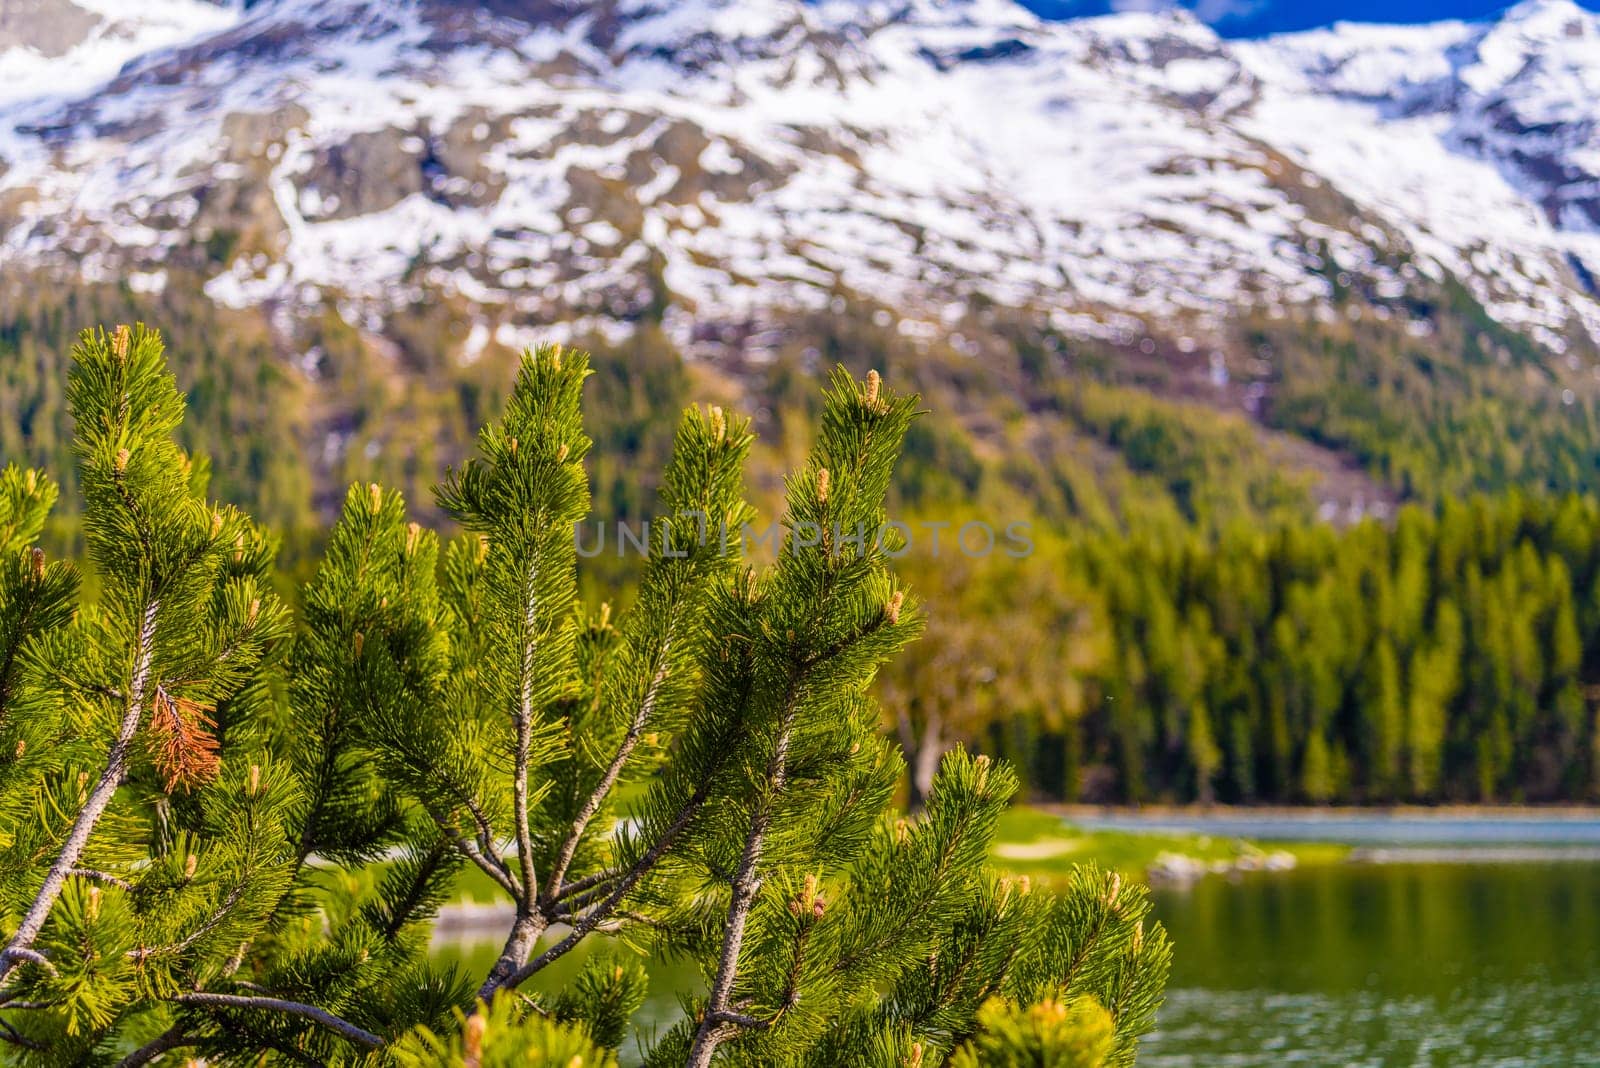 Pine branch with a crystal blue Lake St. Moritz and snowy mountains in the background, Sankt Moritz, Maloja Grisons Switzerland by Eagle2308